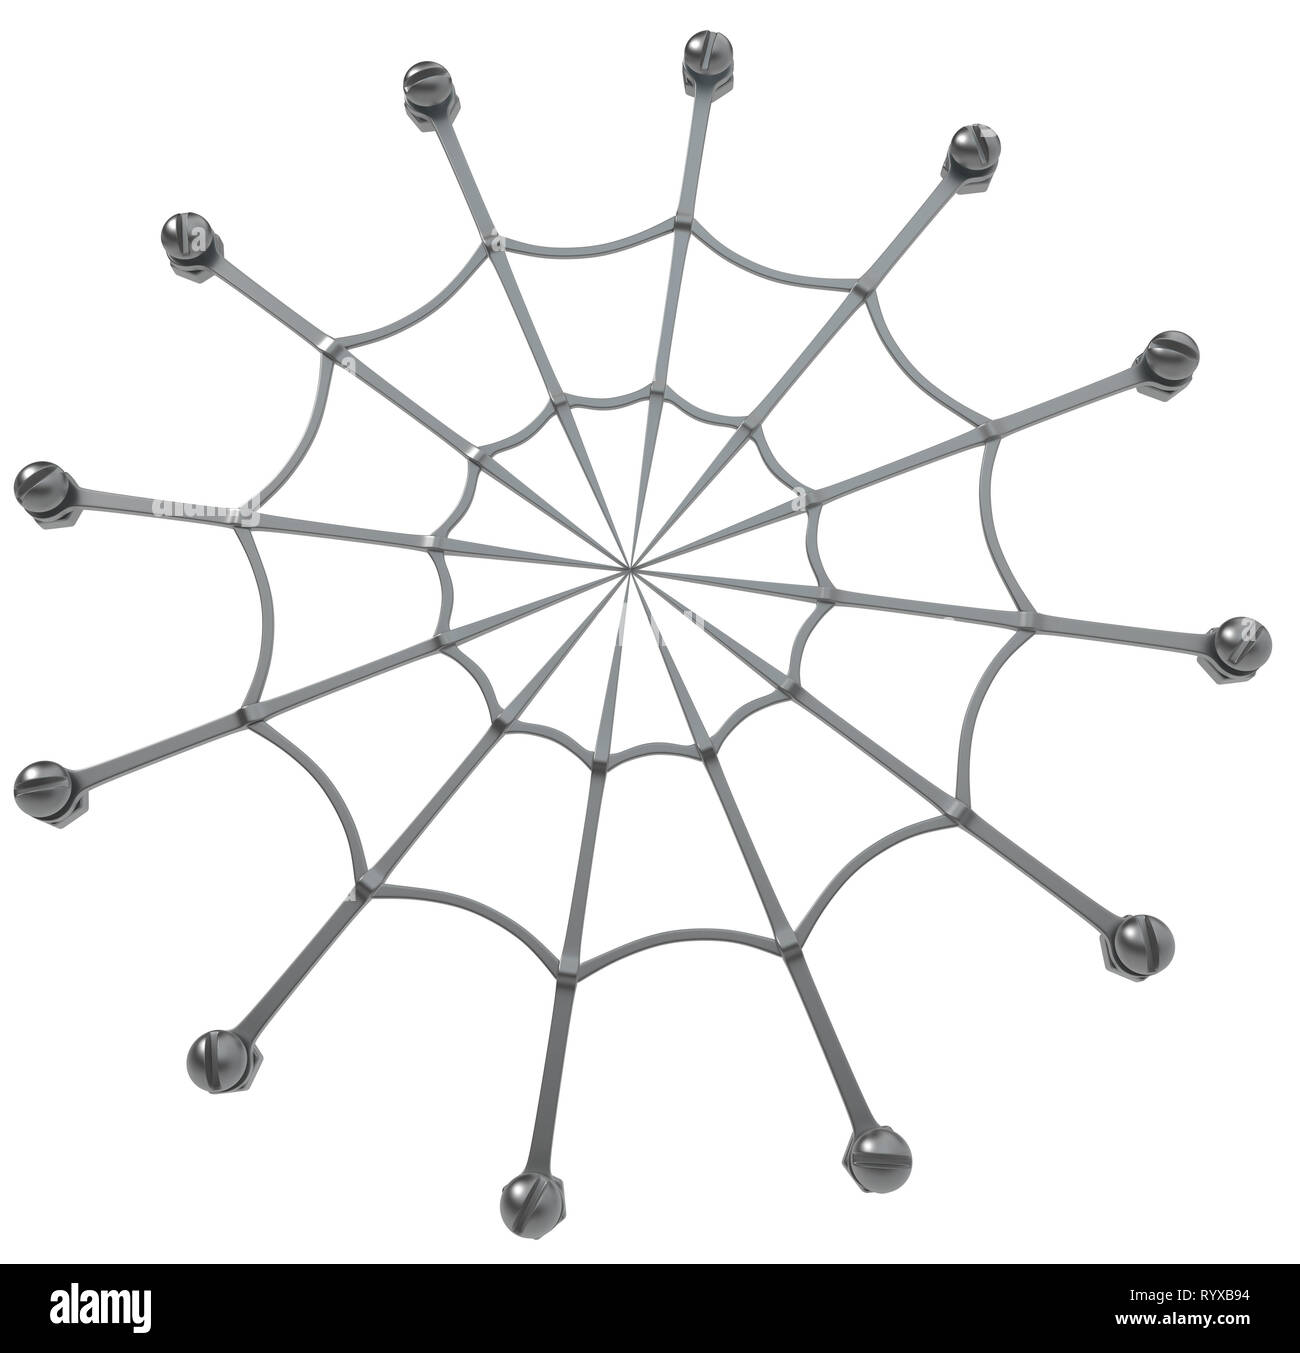 Spider web bolted grey metal 3d illustration, isolated, horizontal, over white Stock Photo